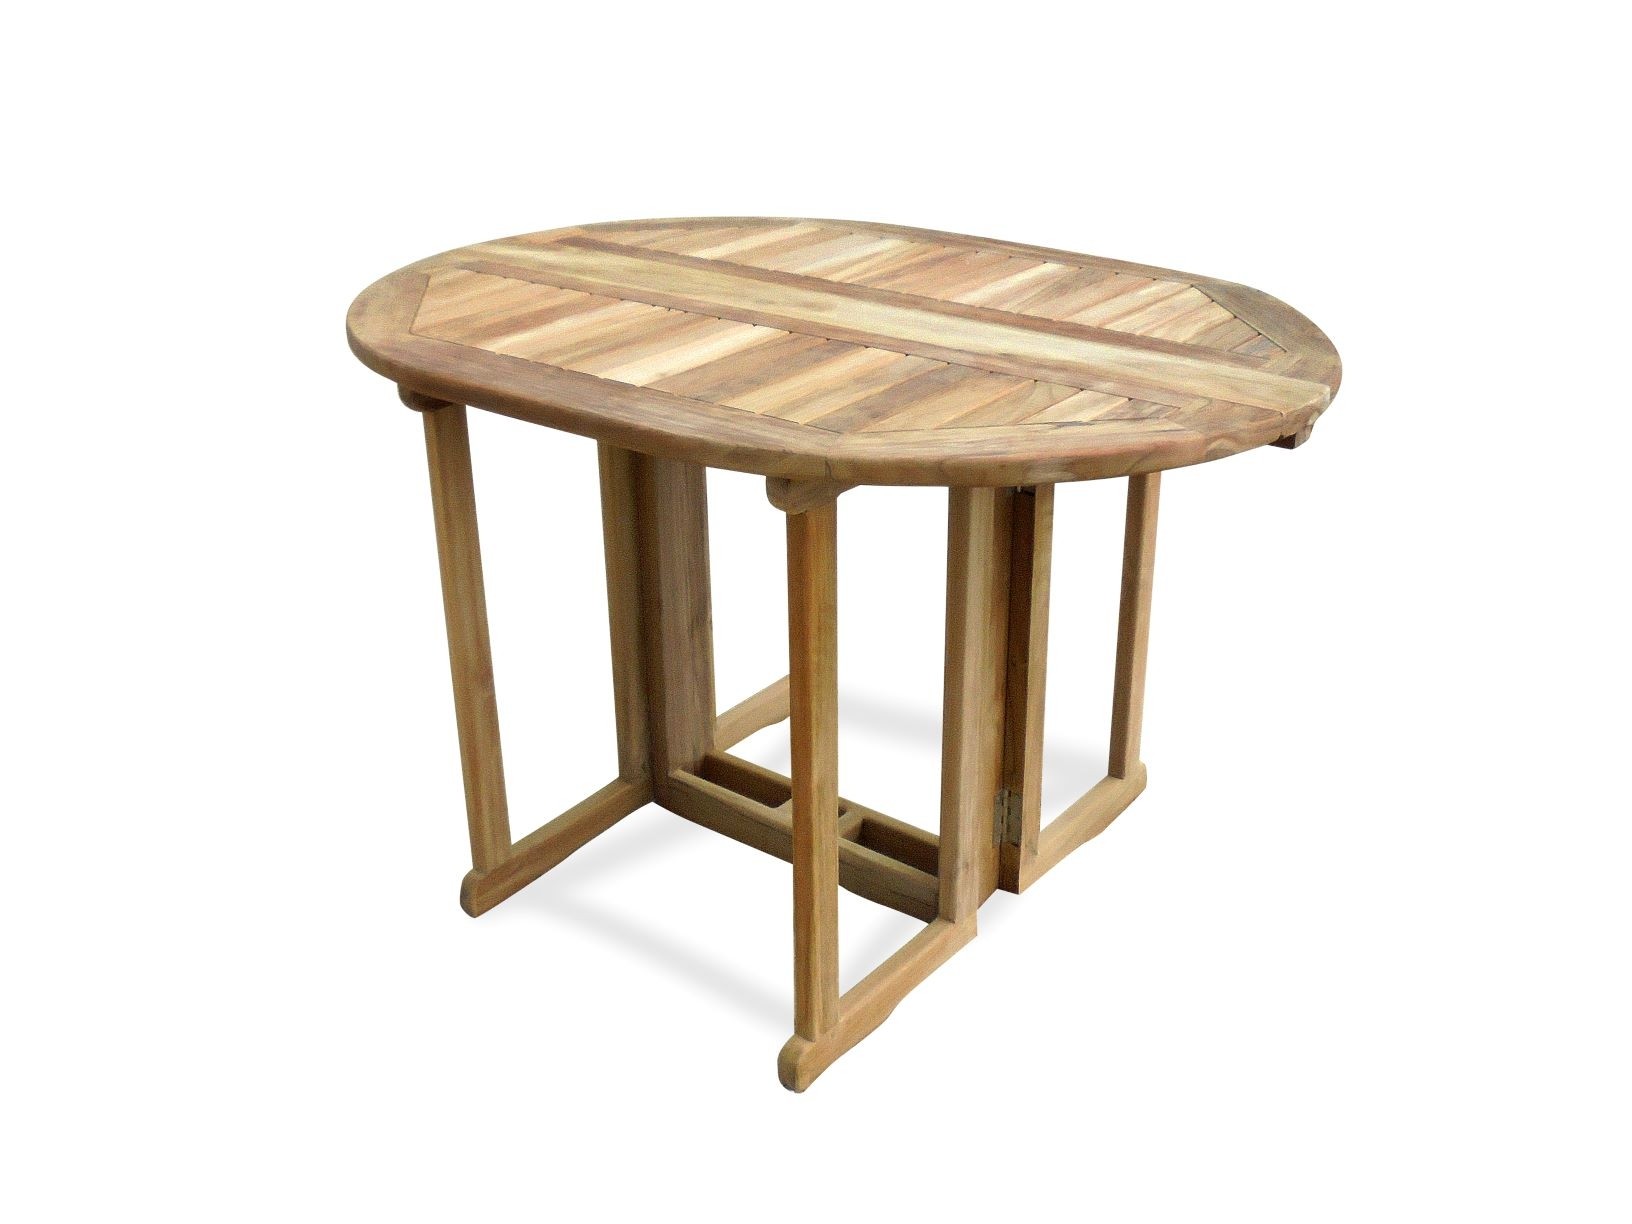 Barcelone 48" x 35" Oval Drop Leaf Folding Dining Teak Table...use with 1 Leaf Up or 2.... Makes 2 different tables